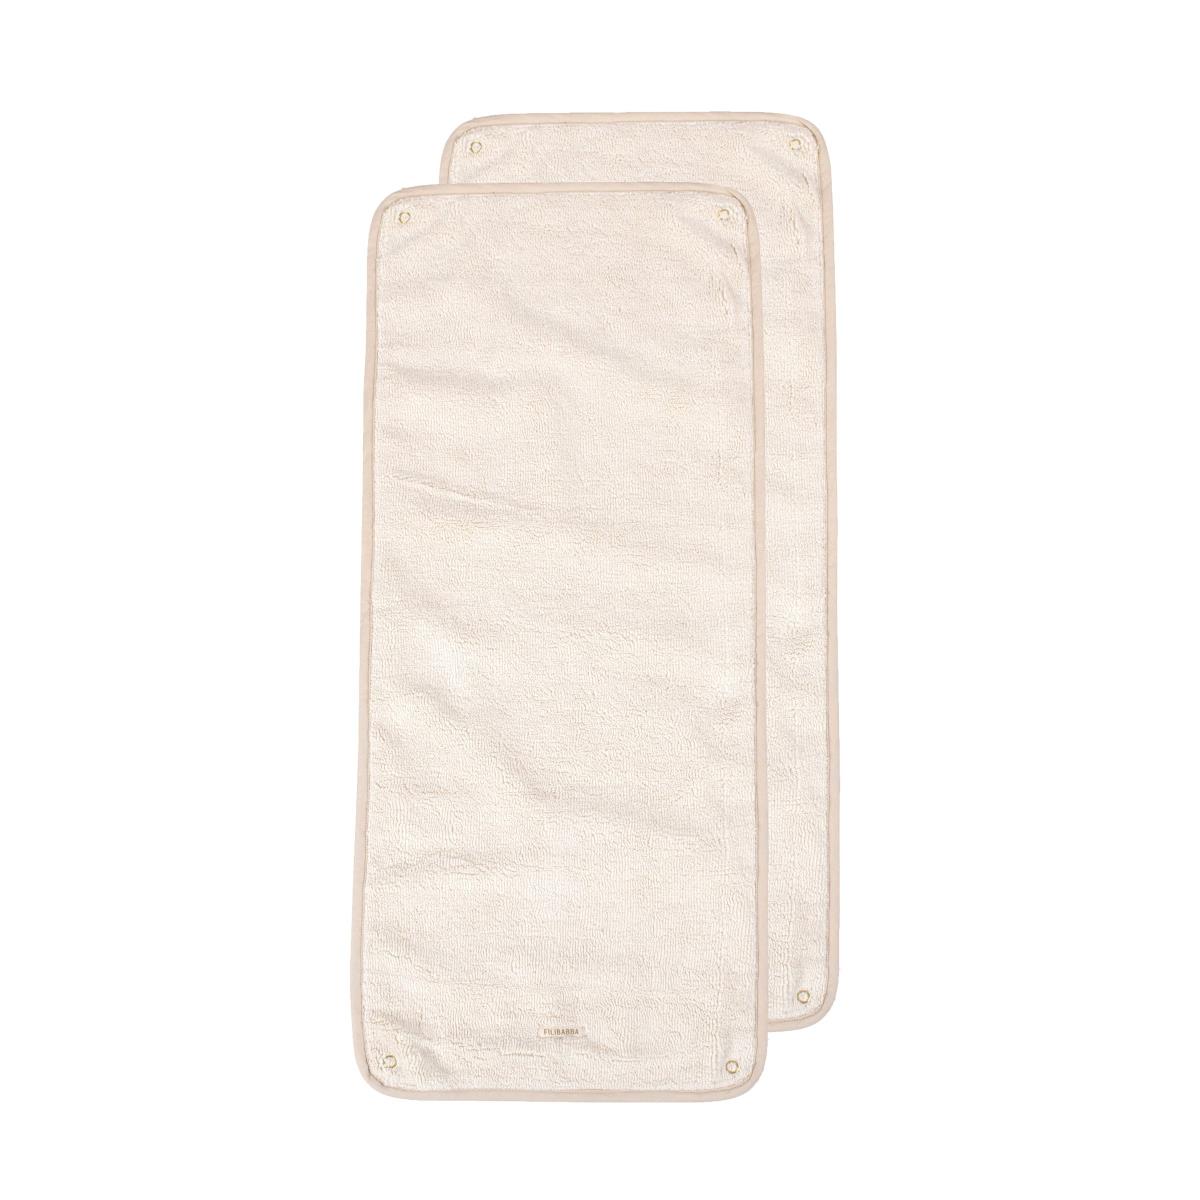 Filibabba - Middle layer 2-pack for Changing Pad - Doeskin